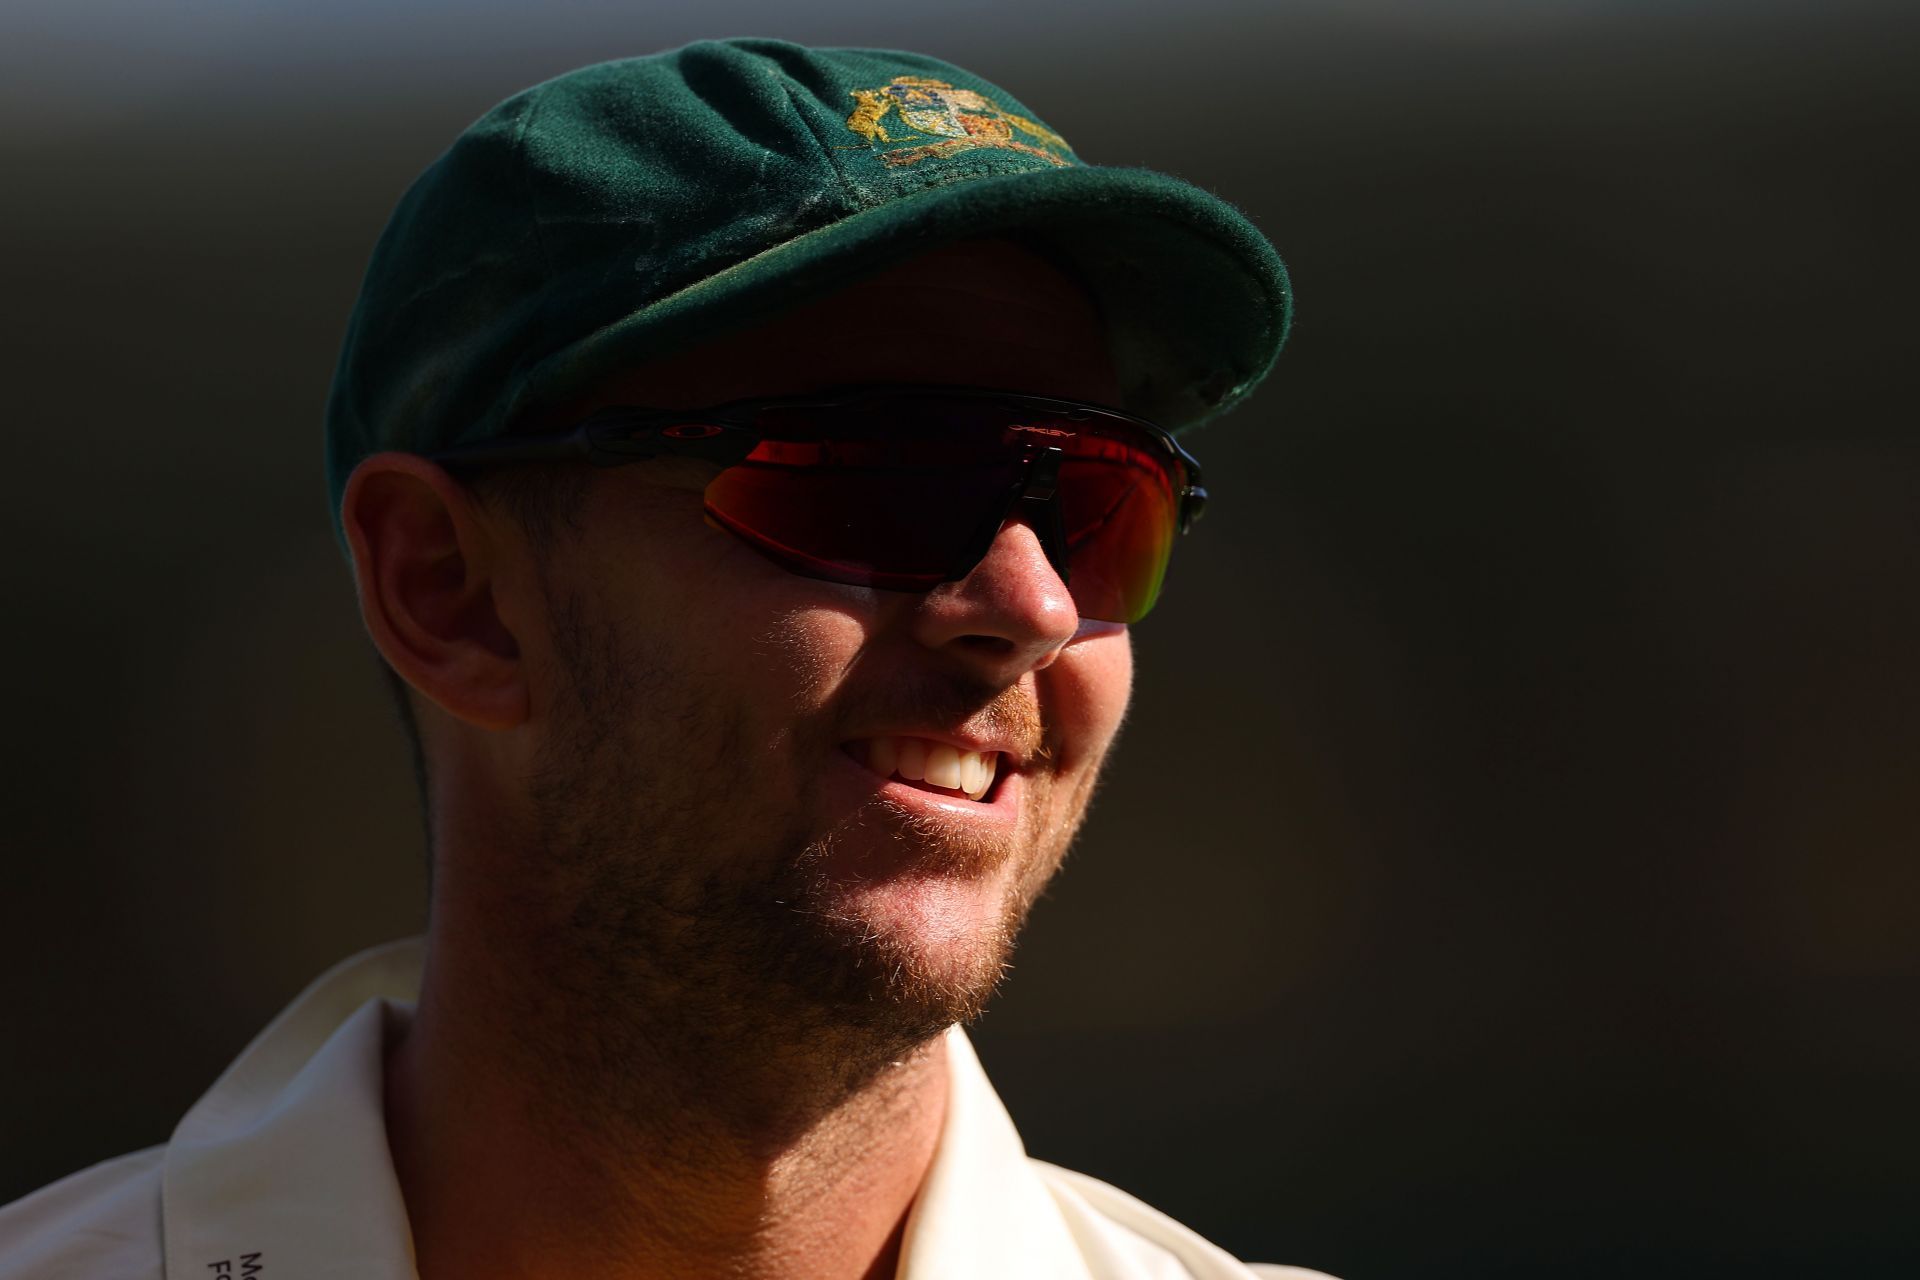 Australia v South Africa - Third Test: Day 5 (Image: Getty)